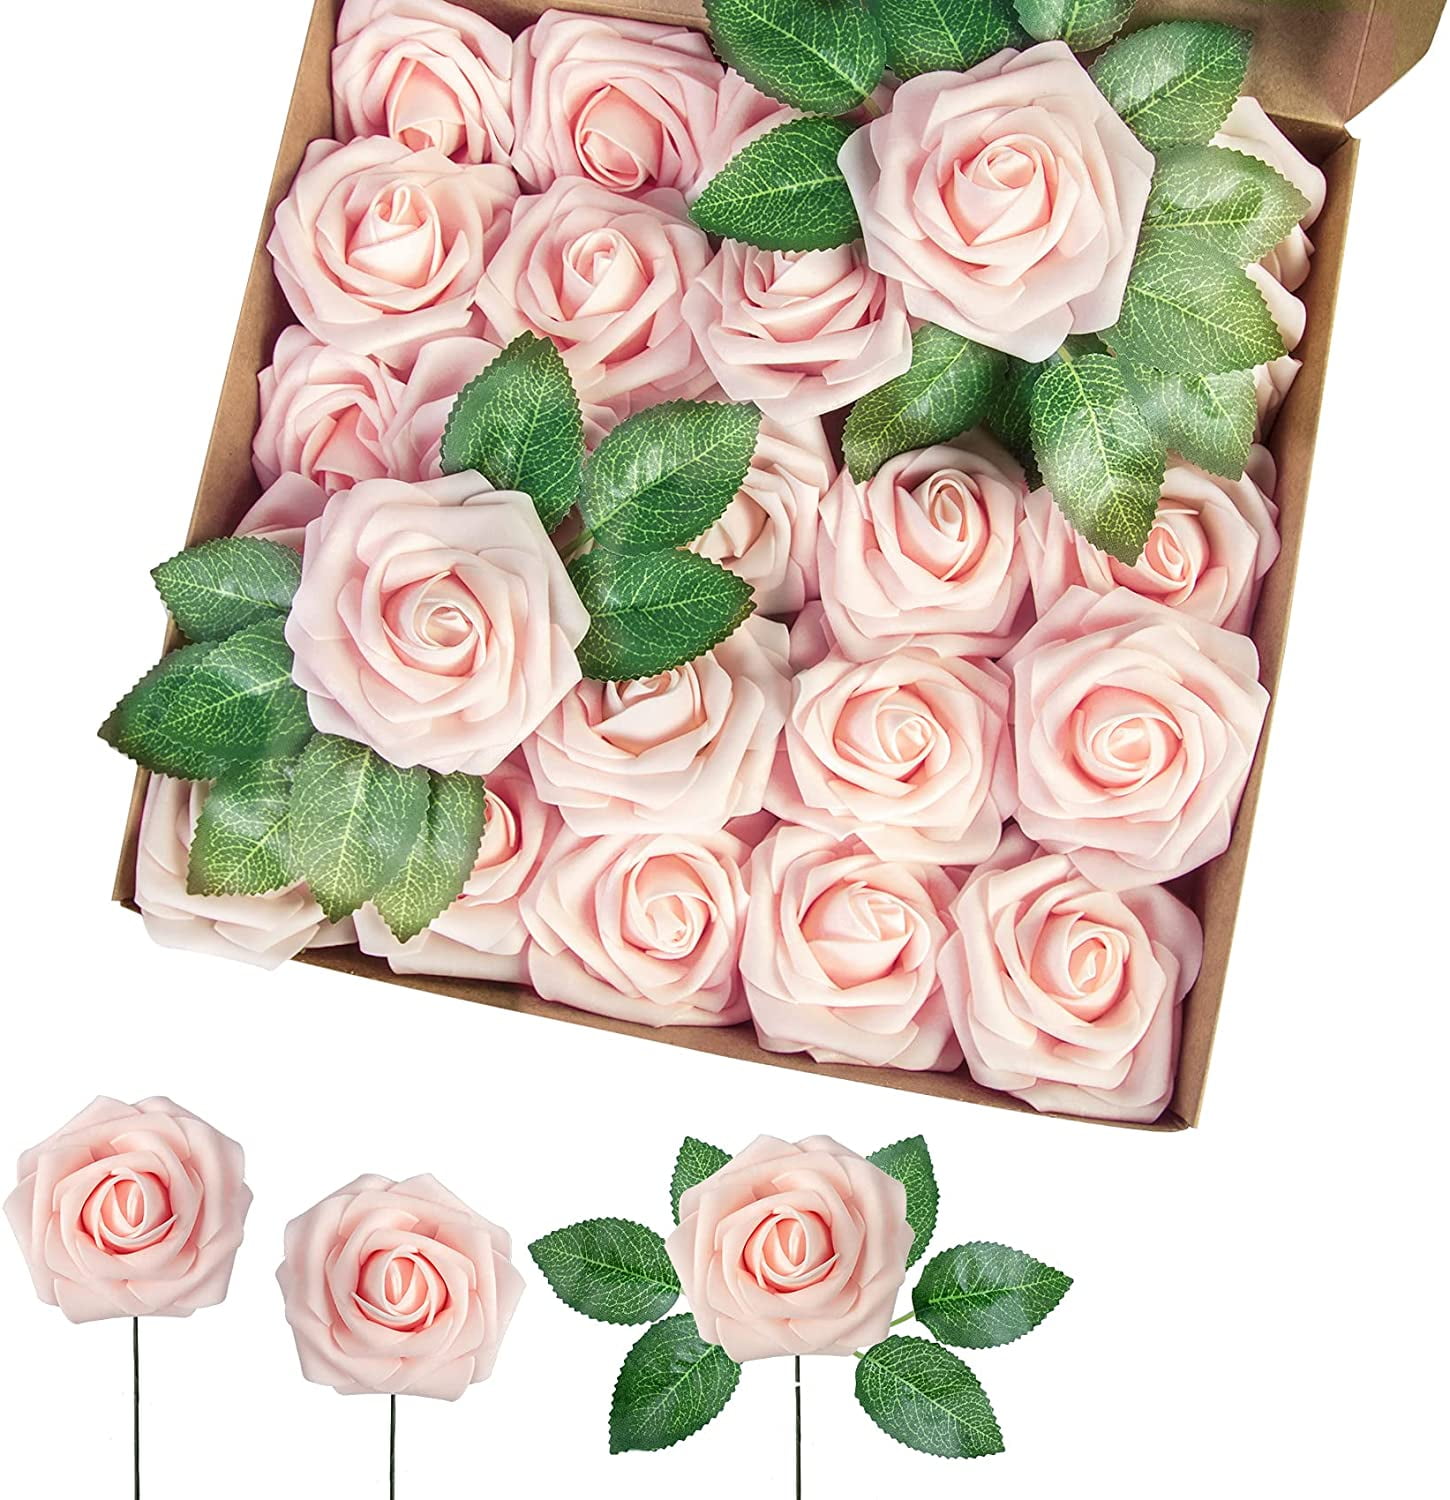 Artificial Flower Bouquet Rose Real Touch Bridal Wedding Supply Home Decor Gift